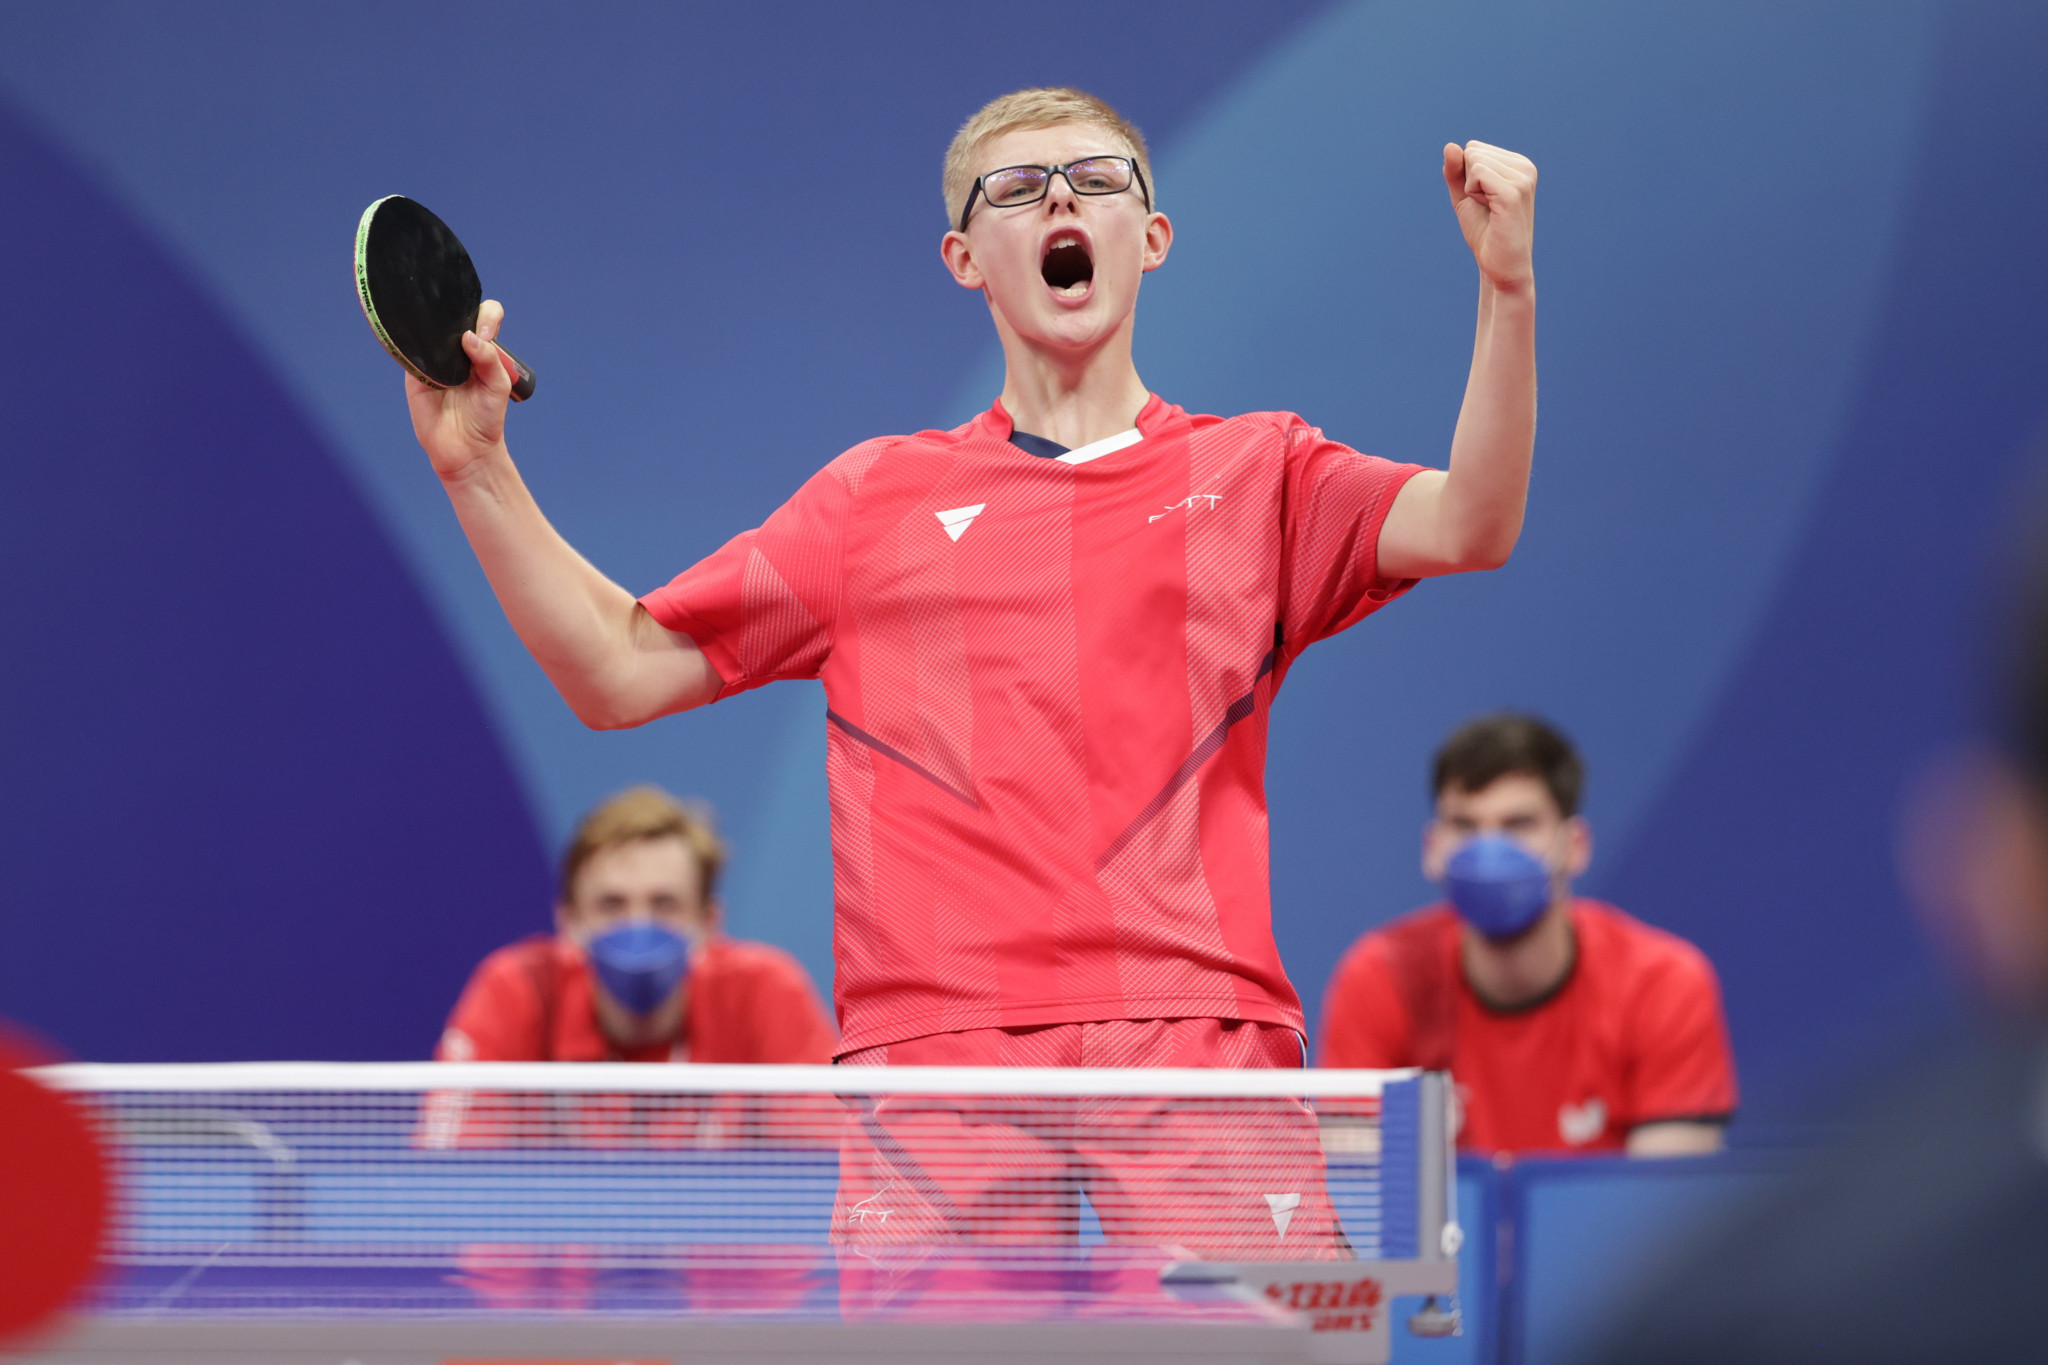 ITTF performance director thrilled with scholars' displays at World Team Table Tennis Championships